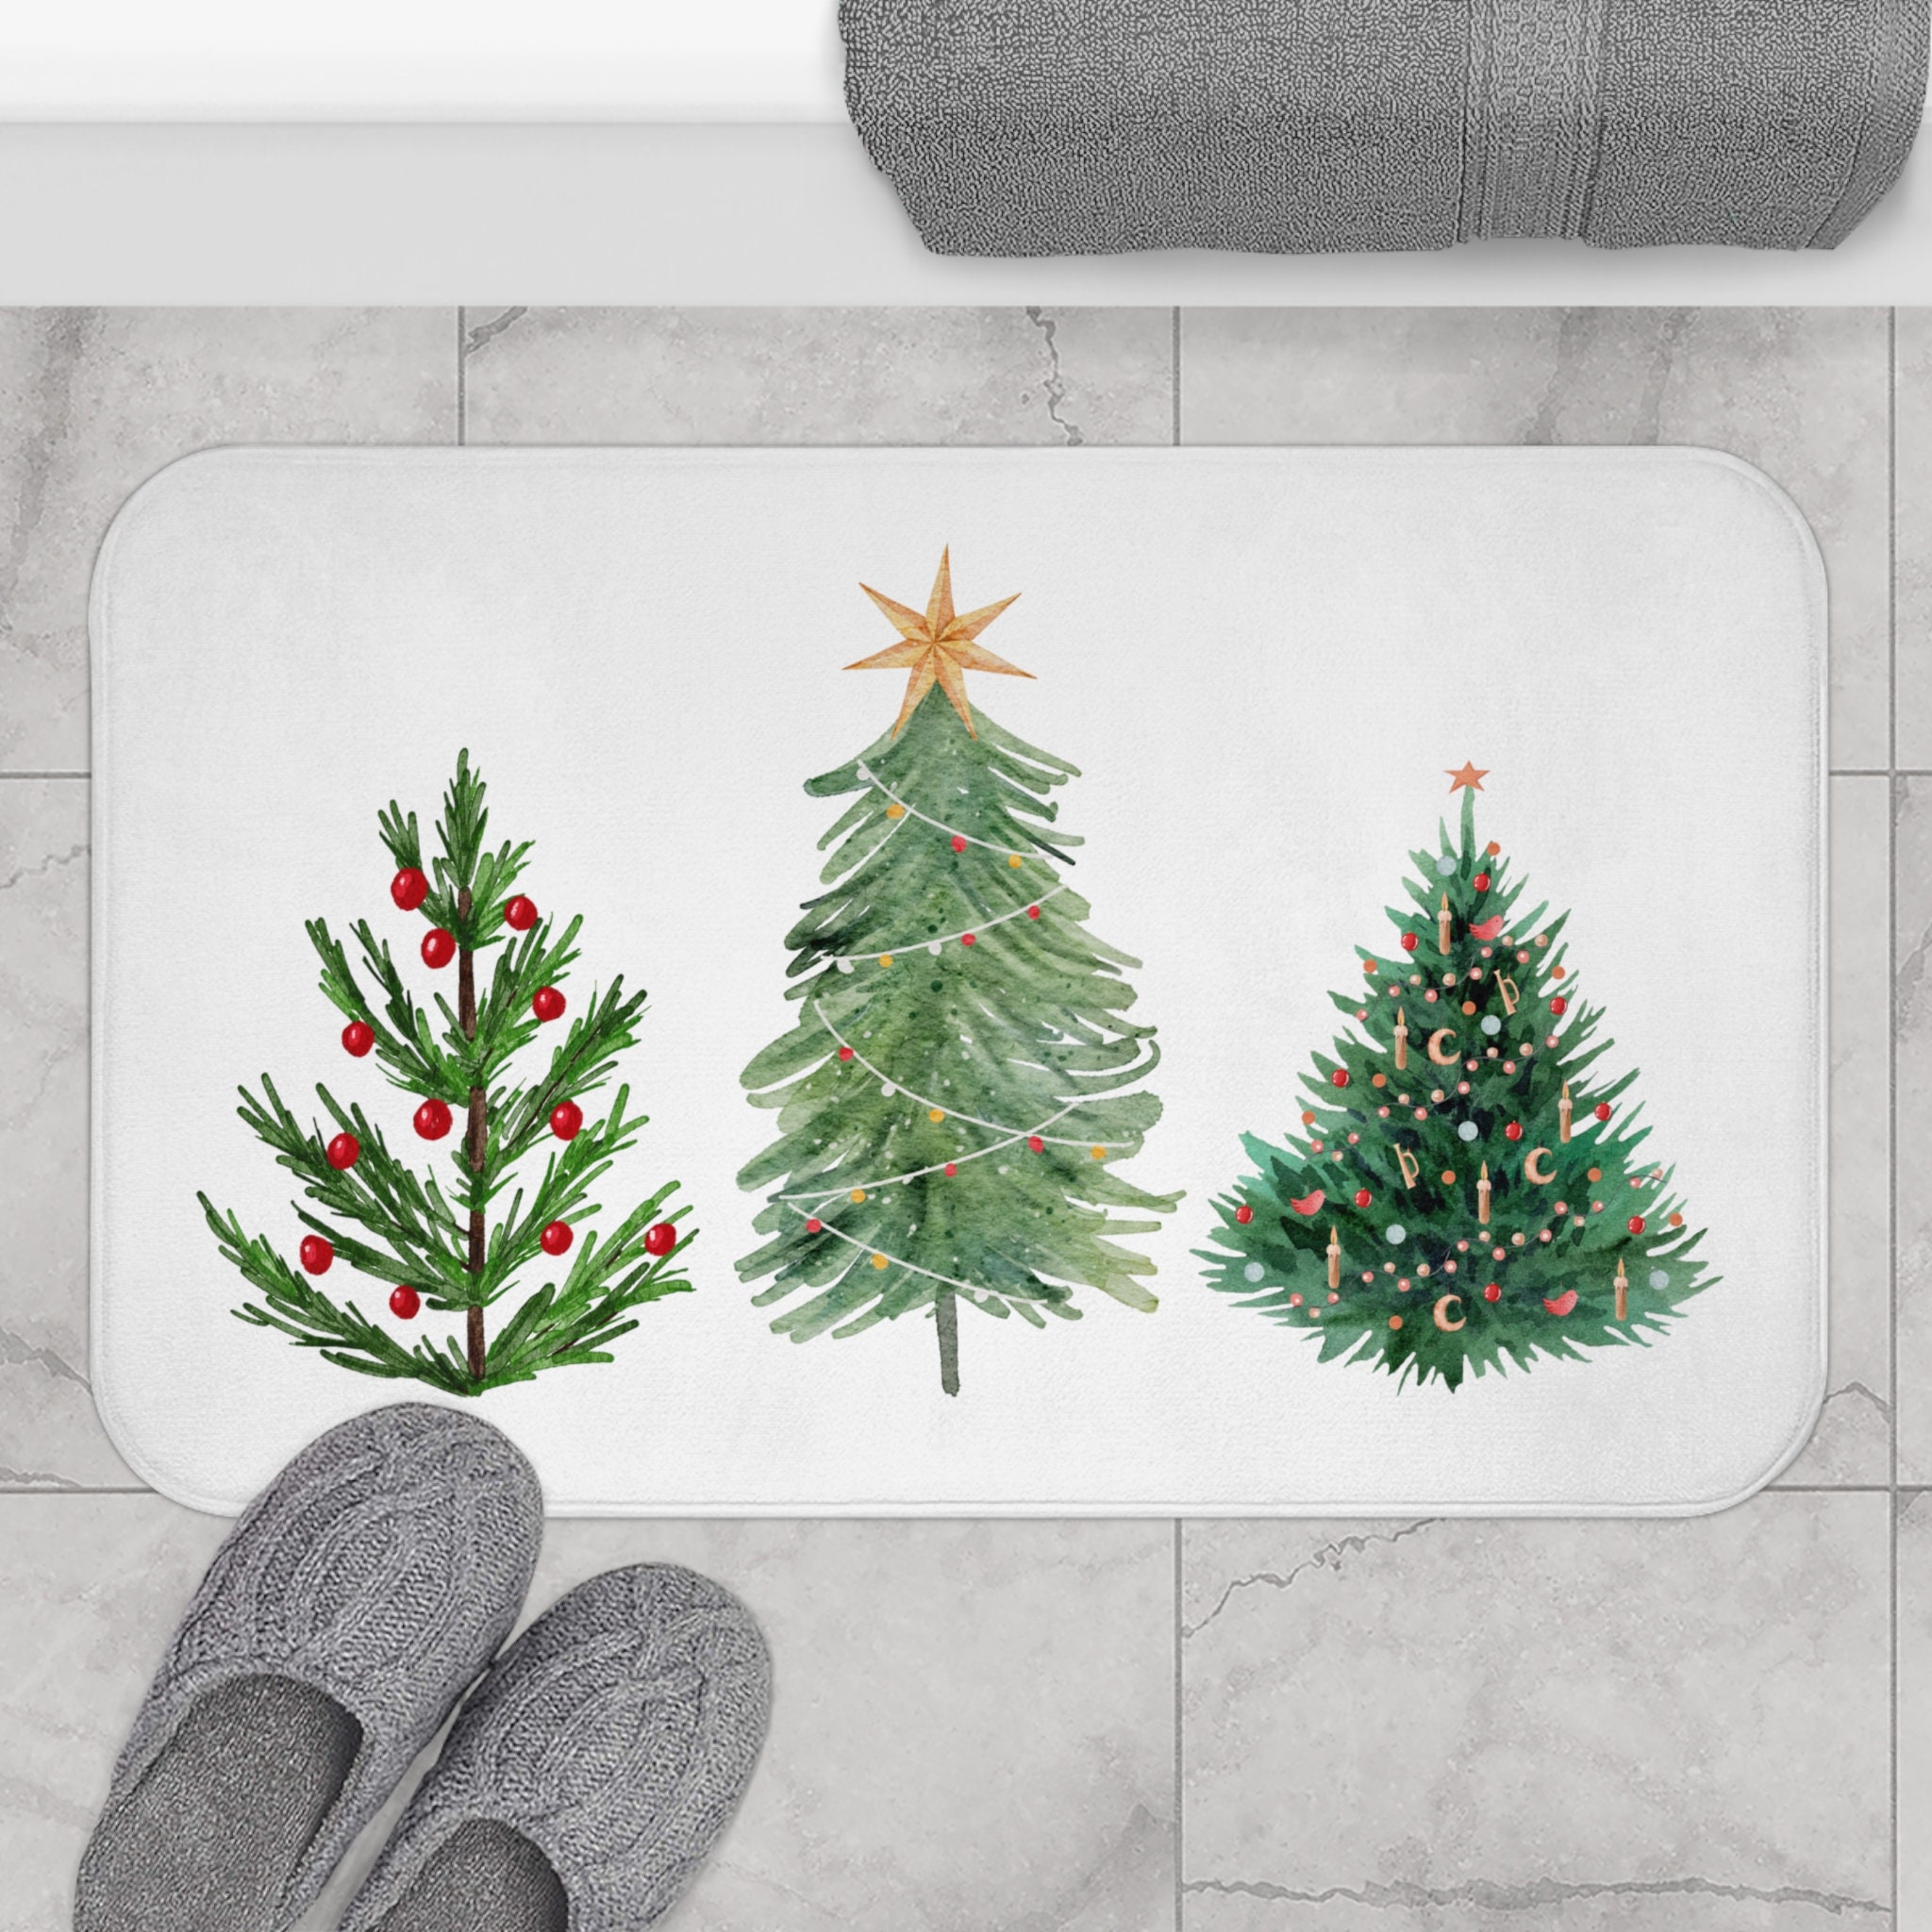  Christmas Dish Drying Mat for Kitchen Counter Xmas Trees Drying  Pad Absorbent Drying Mats for Countertops Sinks Draining Racks Pink Golden  Snowflake Reversible Drainer Xmas Decor 16x18 Inch: Home & Kitchen